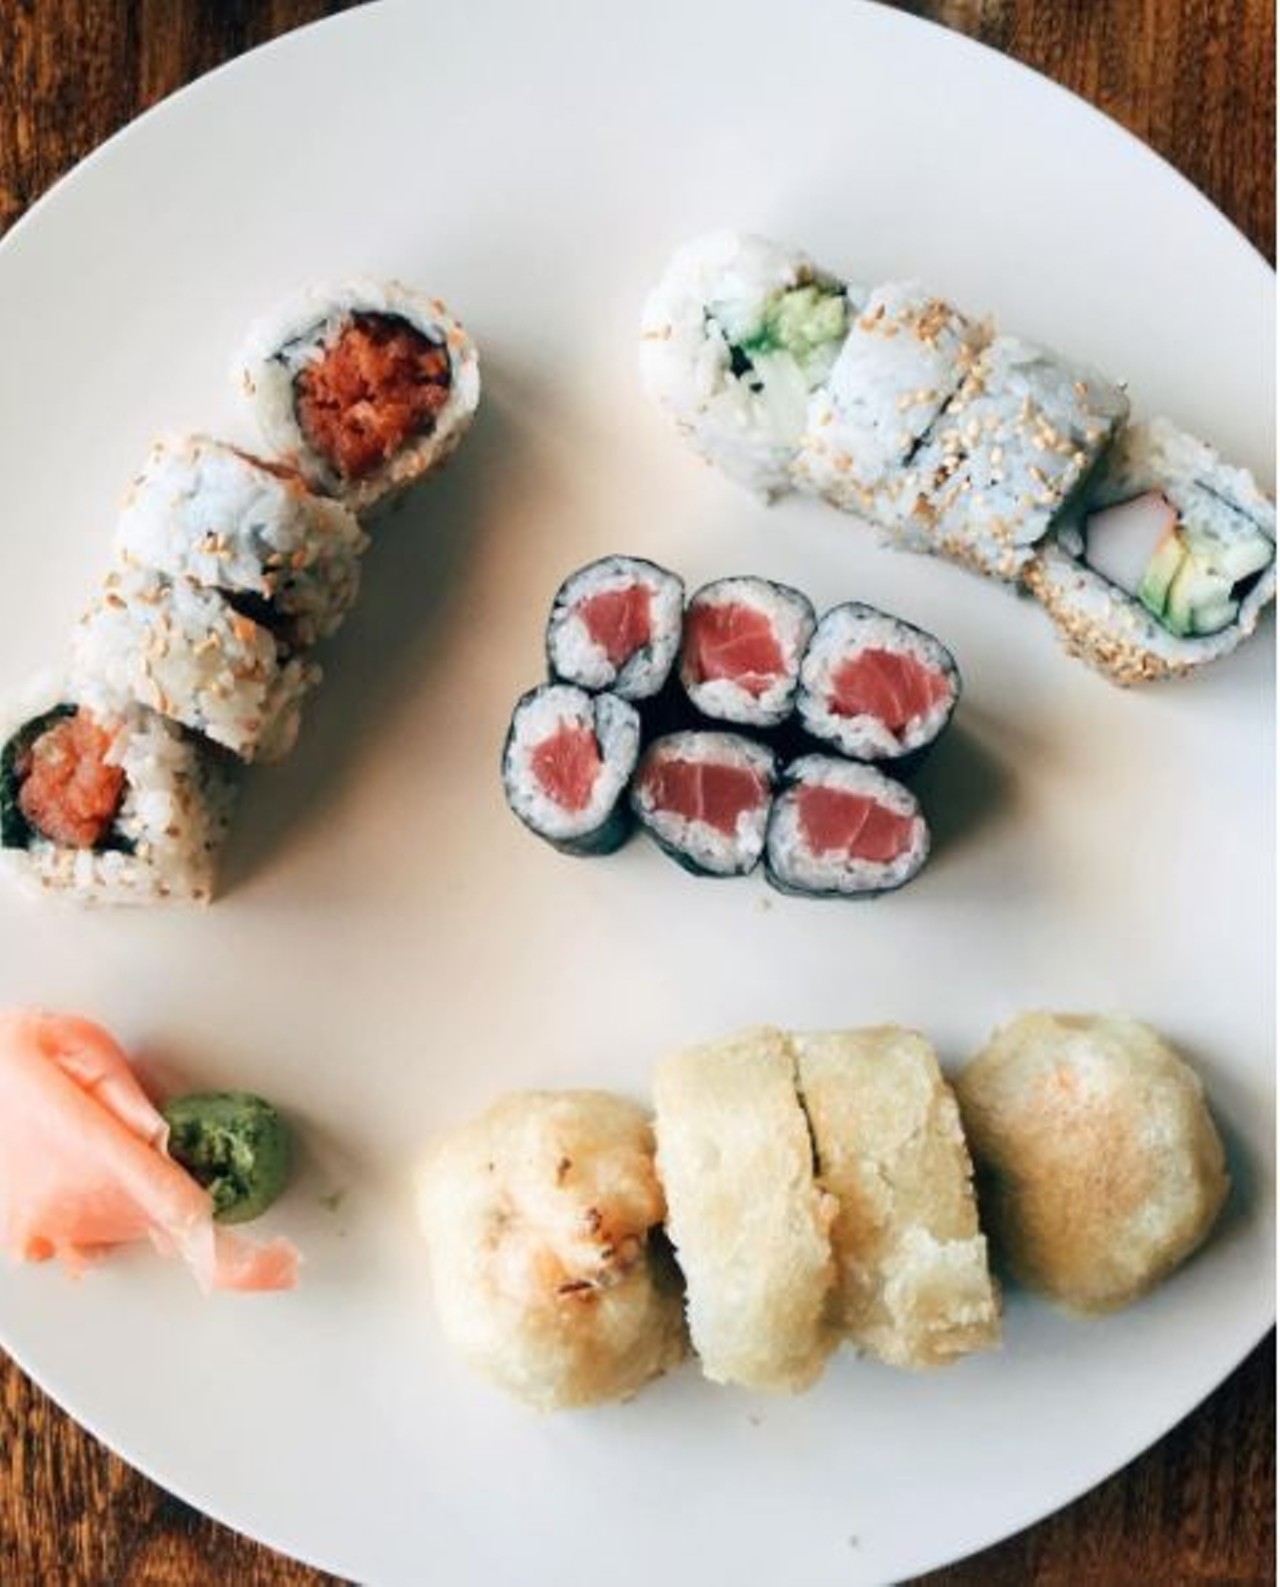 Godai&#146;s Sushi Bar & Japanese Restaurant 
11203 West Ave., (210) 348-6781
Goro is the sushi king of San Antonio. You&#146;ll want to stop by during Spurs games for 40 percent off bottles of wine to go with your Spider roll. 
Photo via Instagram, robbiegram